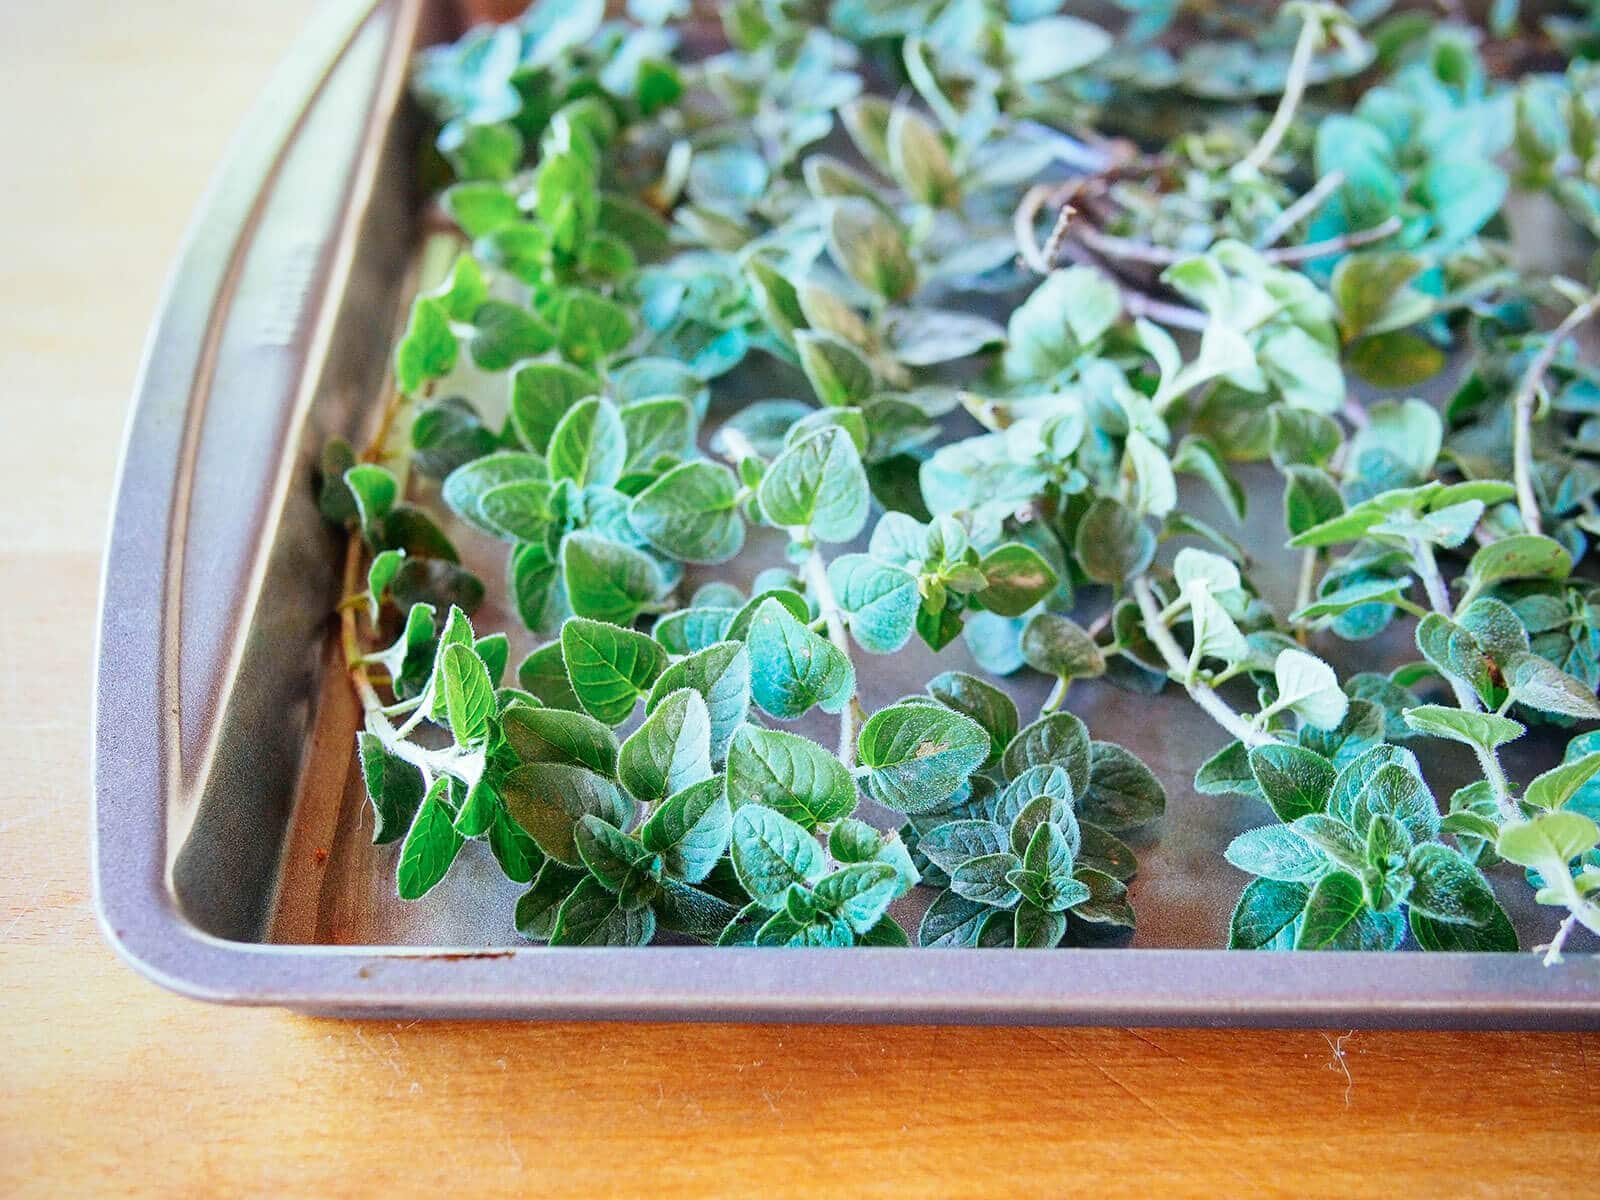 Close-up of oregano leaves, all uniform in size